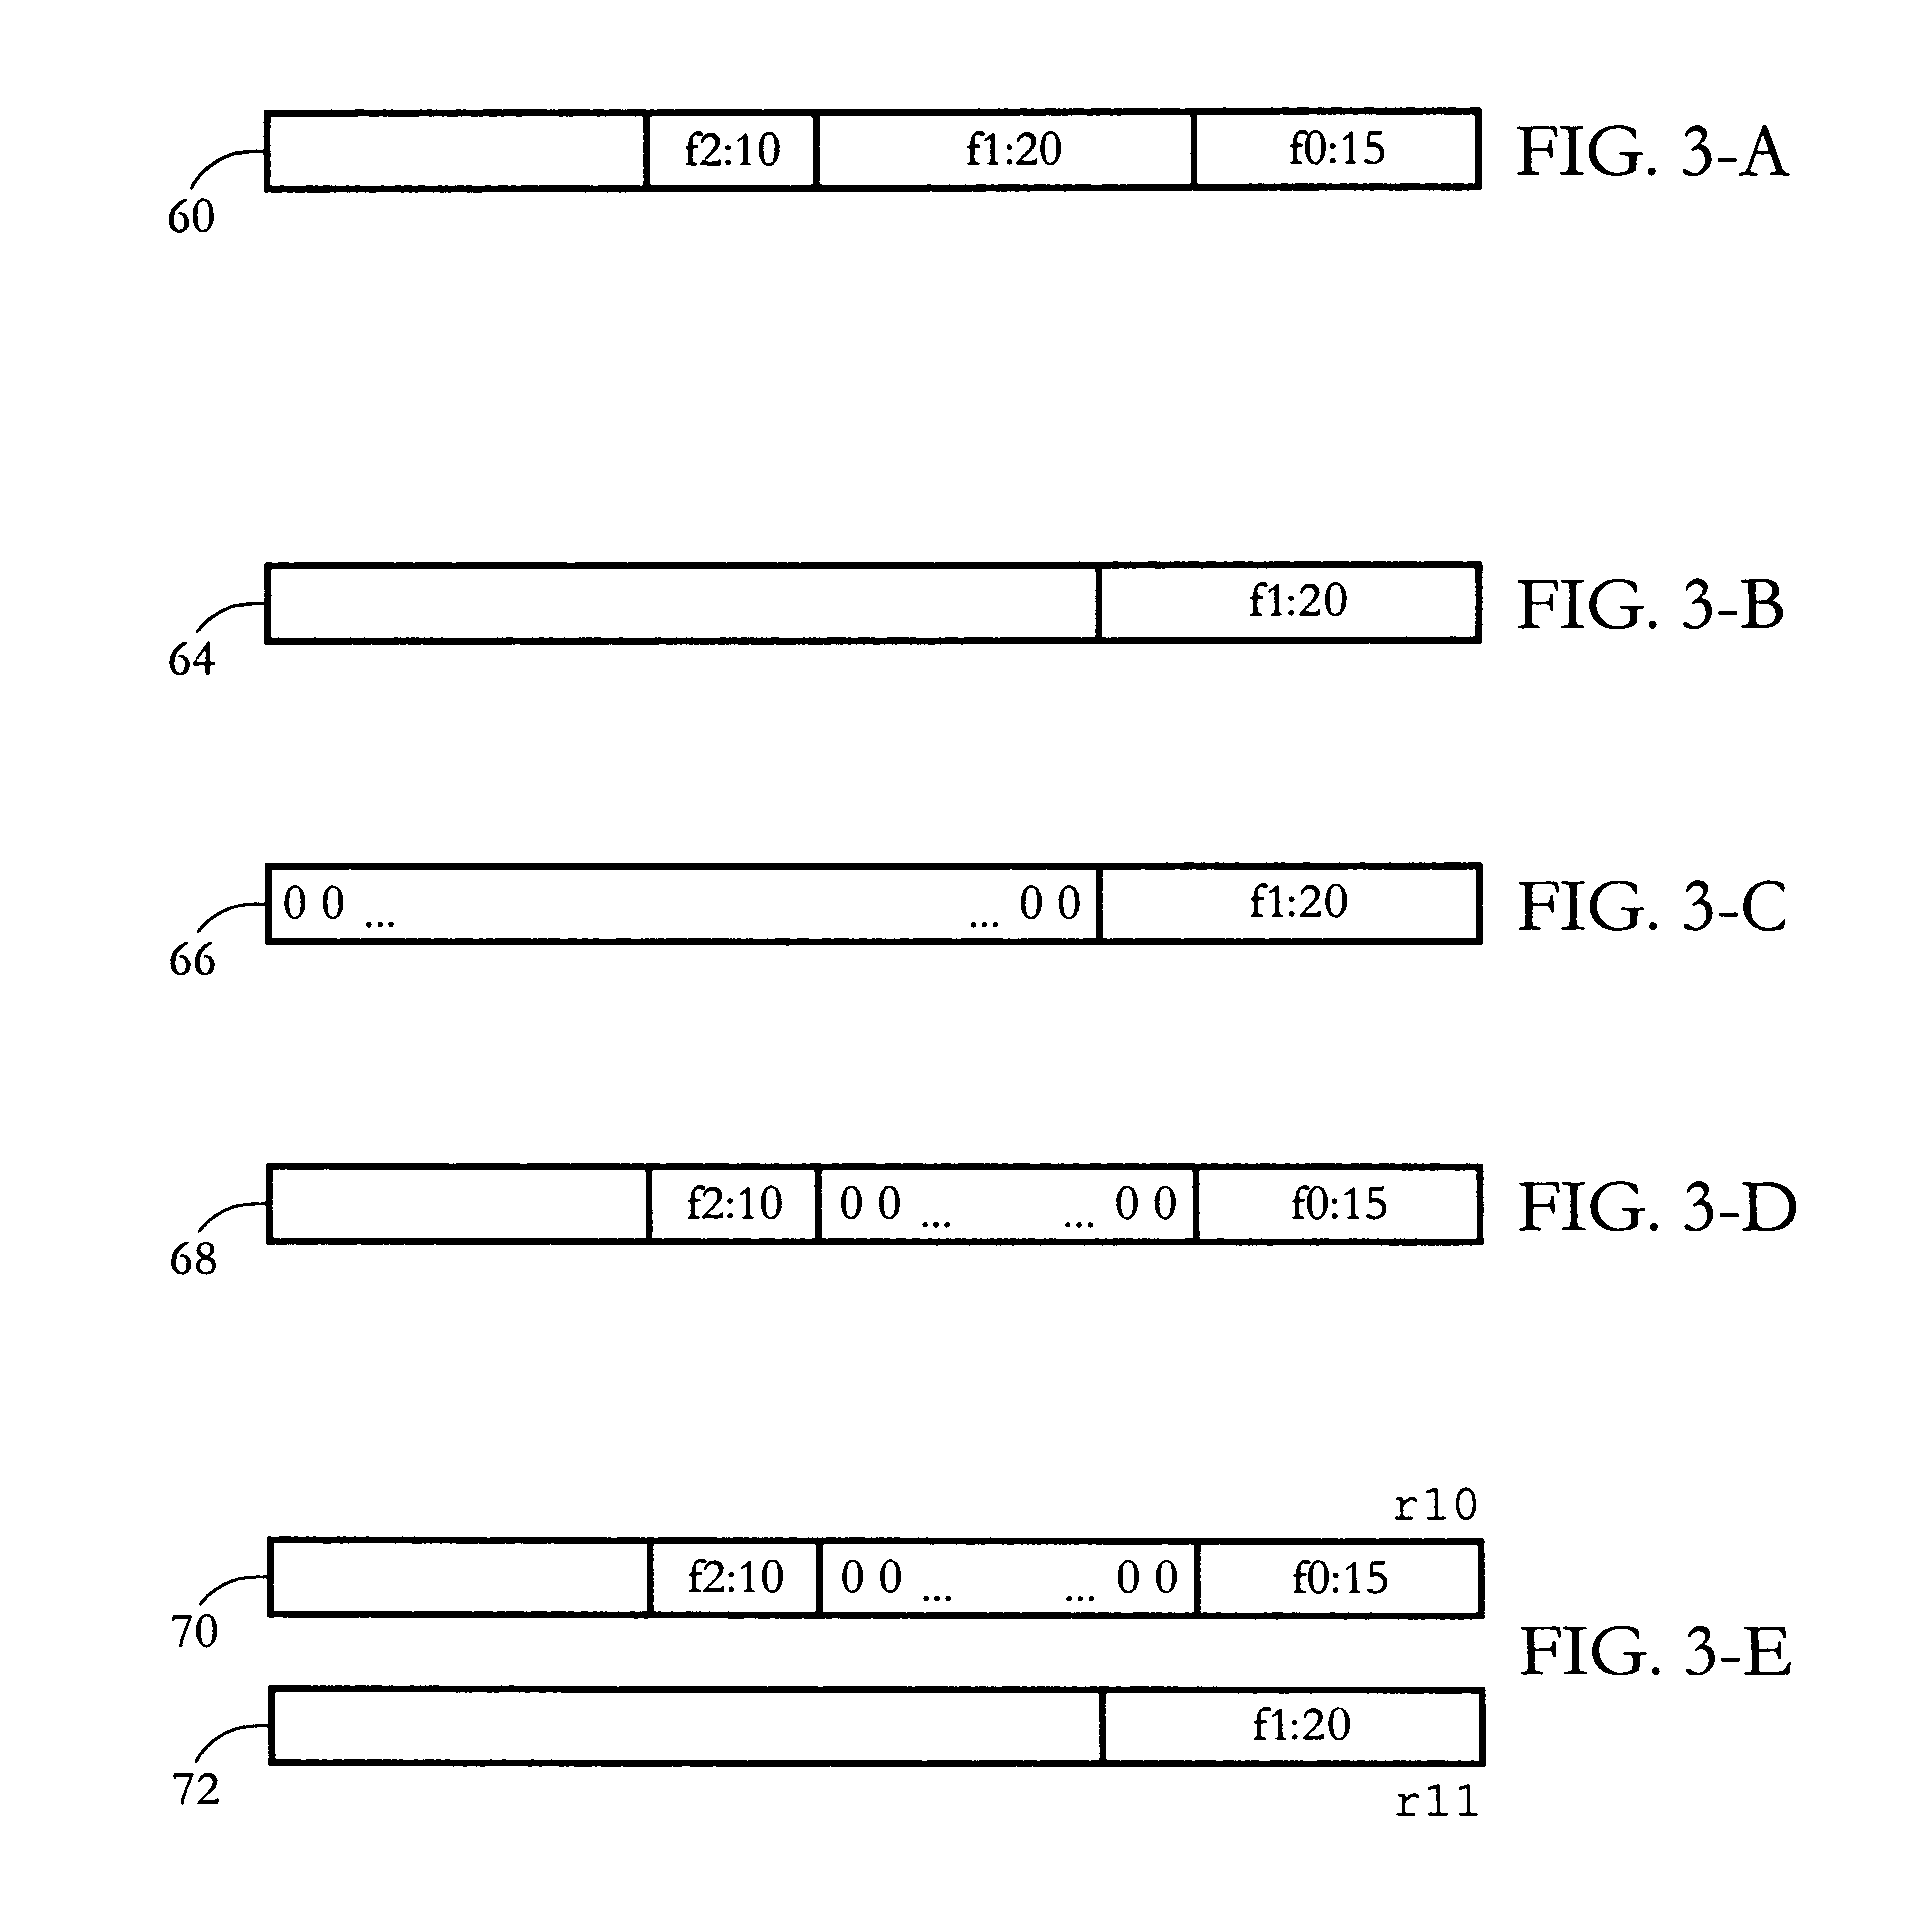 Direct hardware processing of internal data structure fields